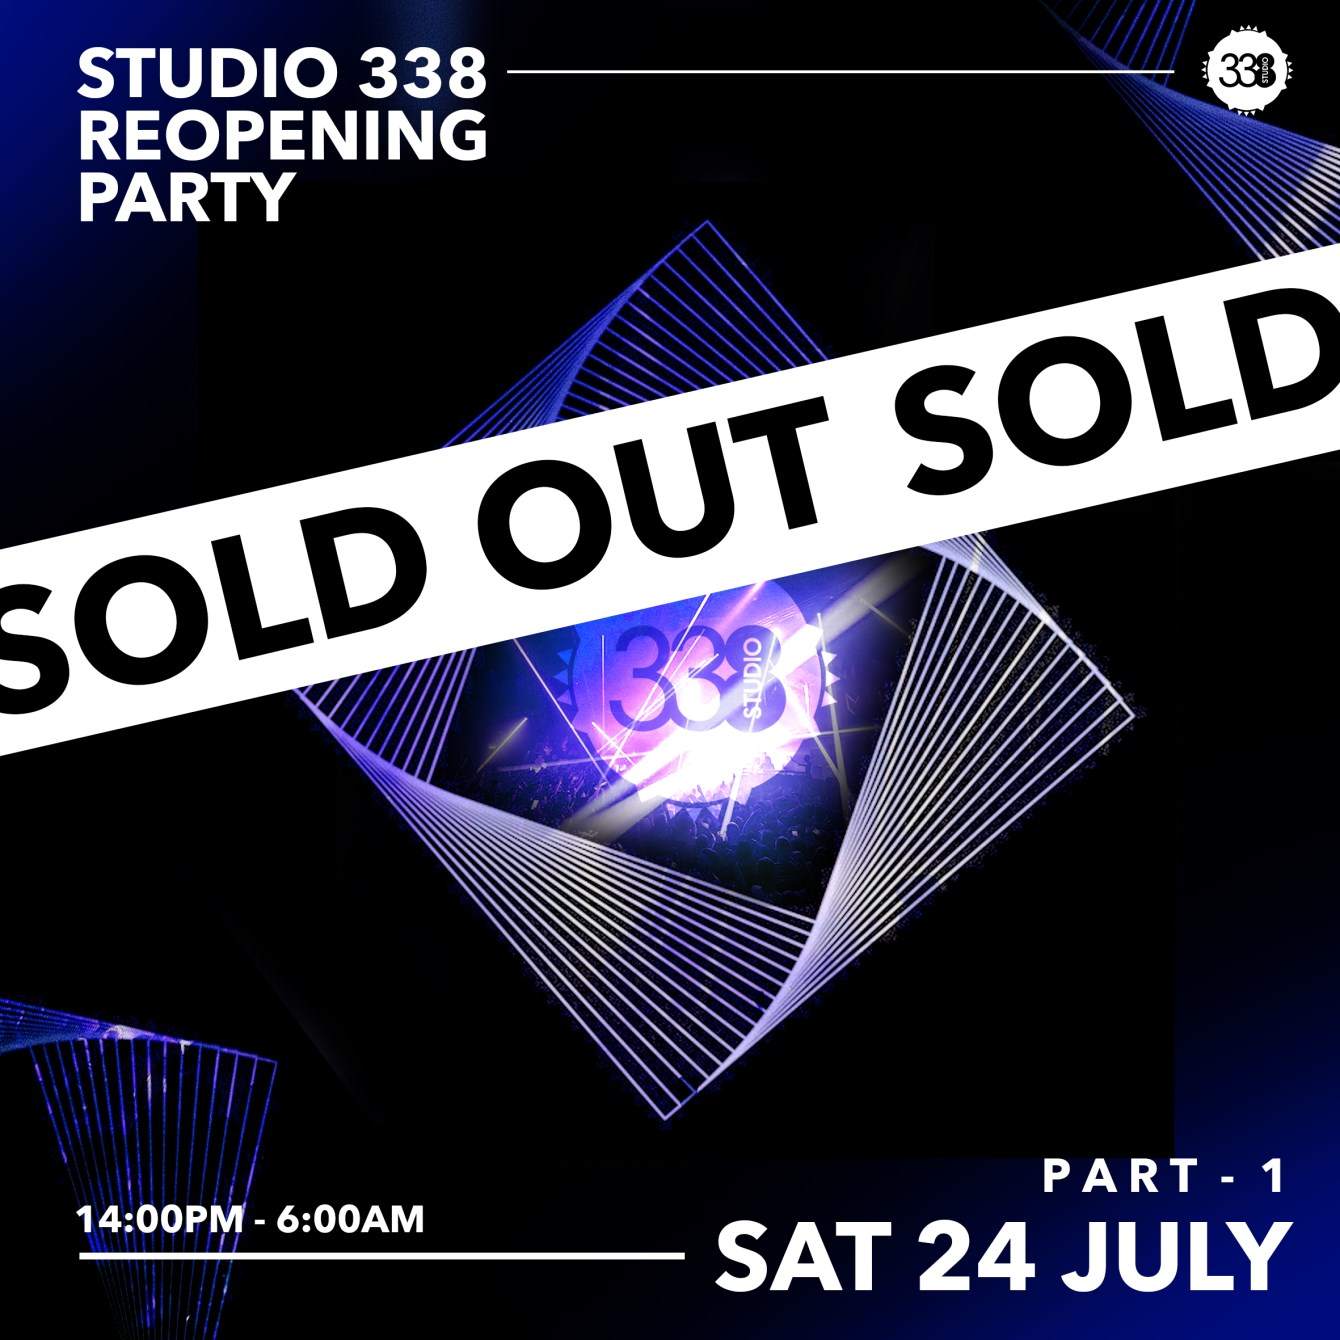 Studio 338 - Re-Opening Party - Saturday (Sold Out) - フライヤー表